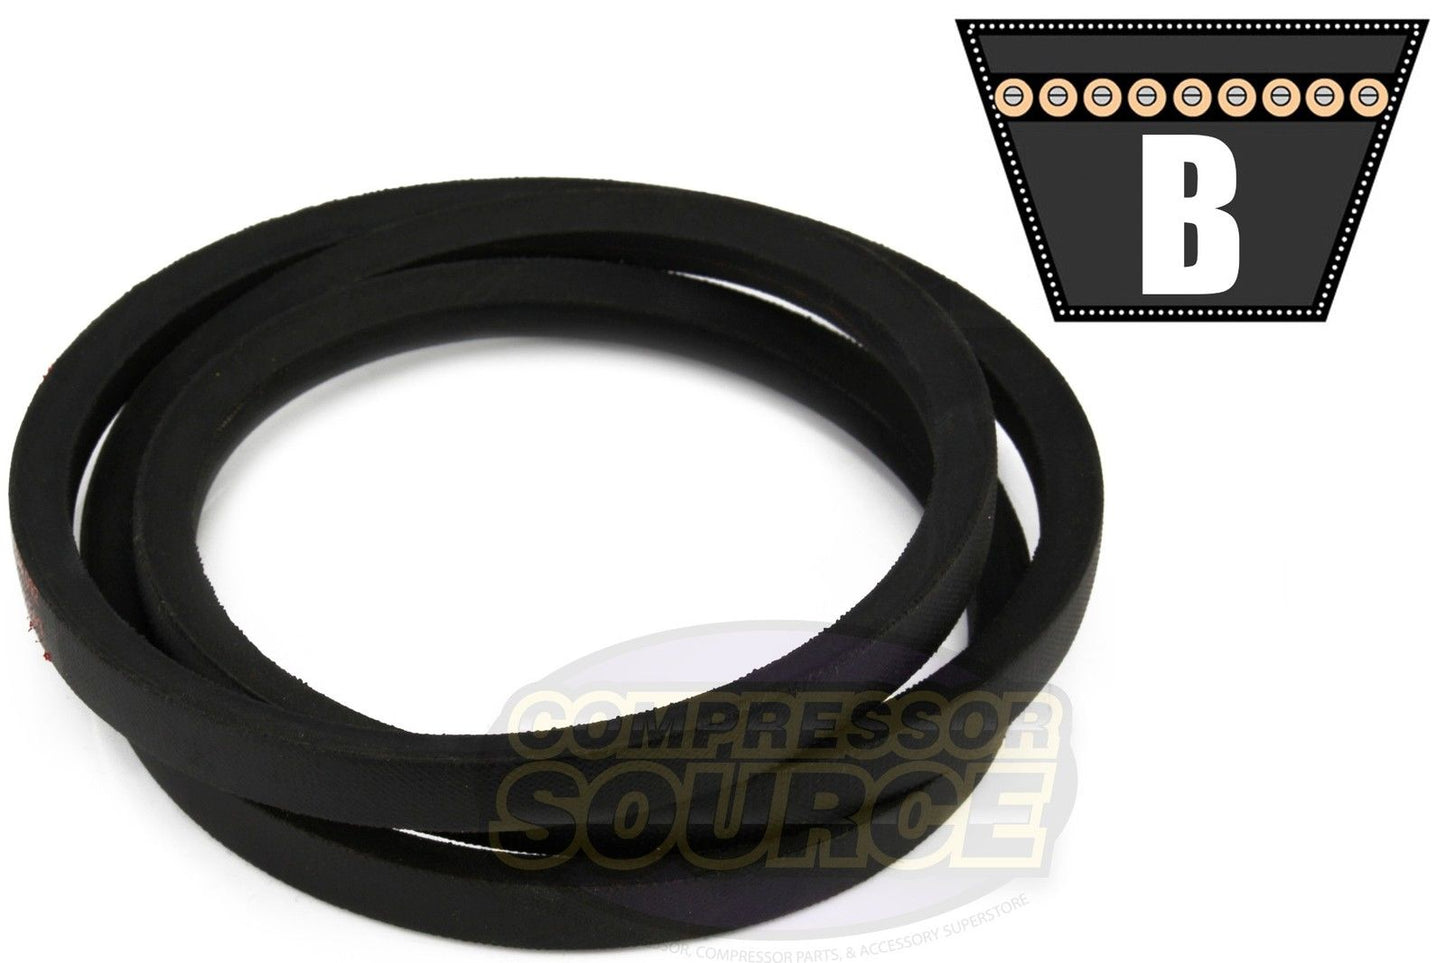 B32 Industrial & Lawn Mower 5/8" x 35"  V Belt 5L350 Replacement High Quality